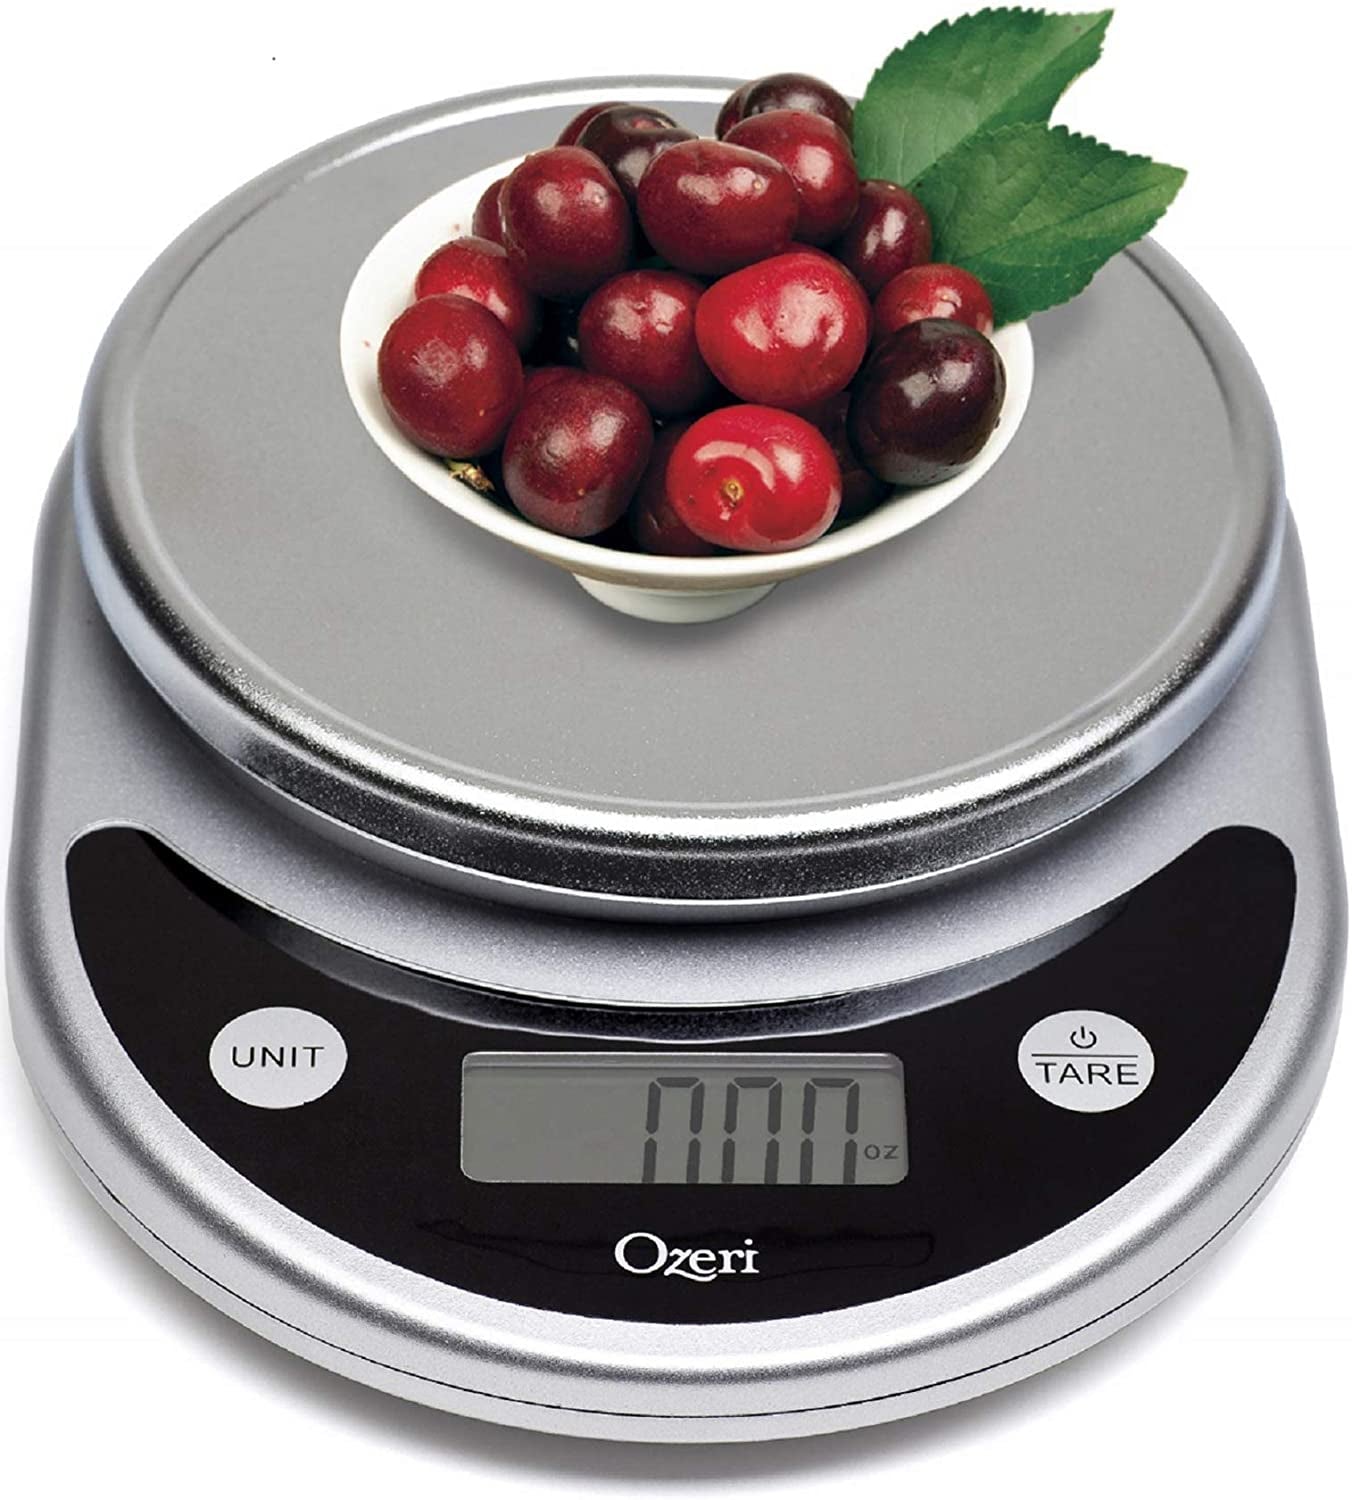 Pronto Digital Multifunction Kitchen and Food Scale, Original, 8.25